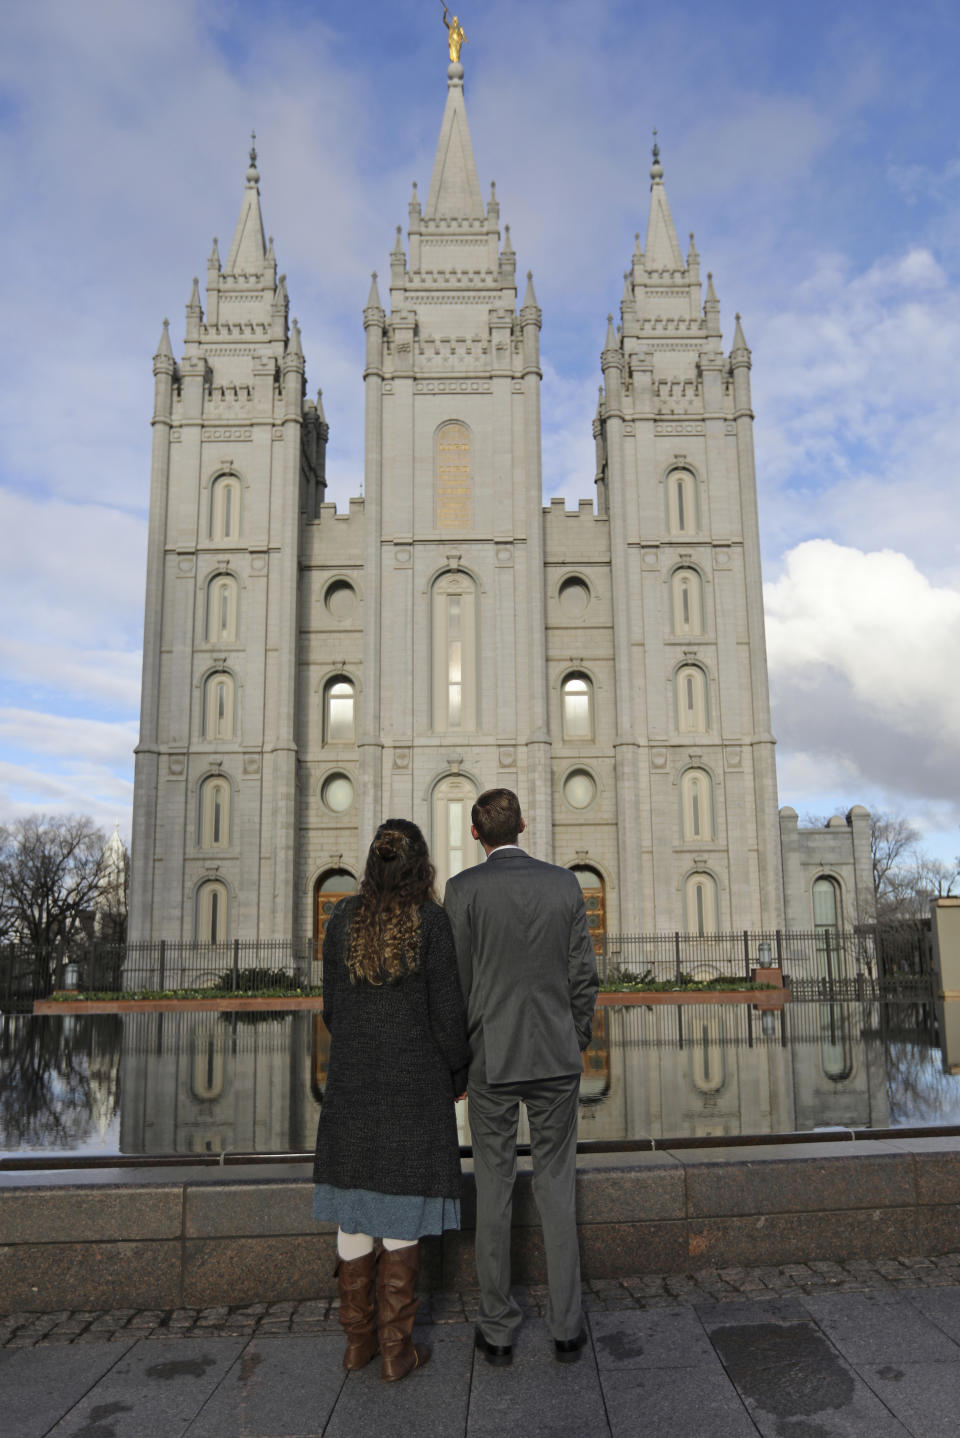 FILE - In this April 6, 2019, file photo, a couple looks at the Salt Lake City temple during the The Church of Jesus Christ of Latter-day Saints' two-day conference. The Church of Jesus Christ of Latter-day Saints added new language to the faith's handbook Friday, Dec. 18, 2020. imploring members to root out prejudice and racism, adding significance and permanence to recent comments by top leaders on one of the most sensitive topics in the church's history. (AP Photo/Rick Bowmer, File)